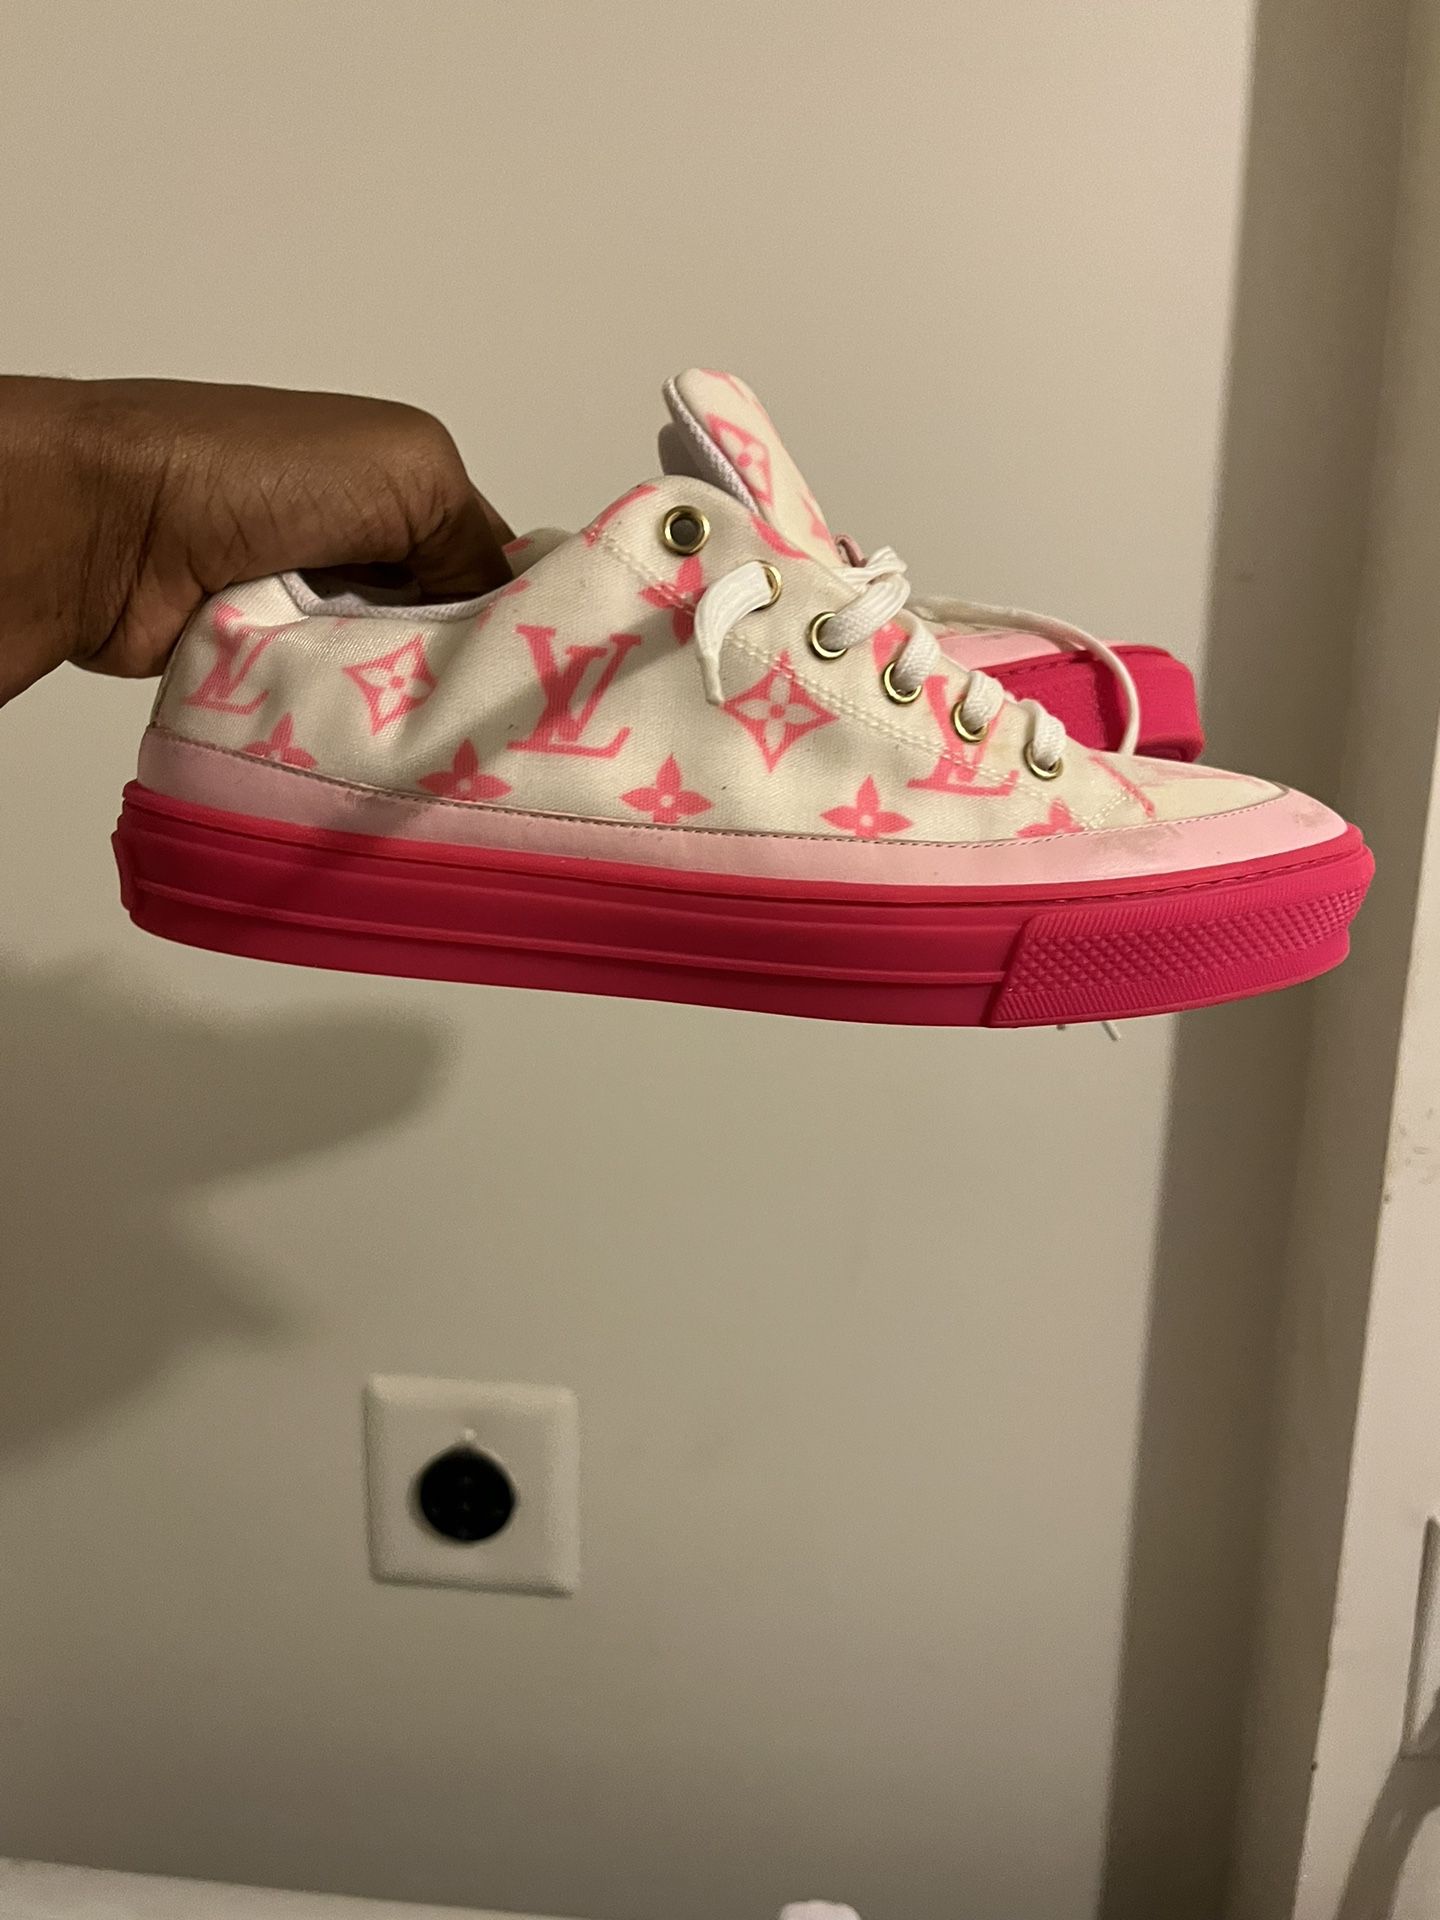 Louis Vuitton Women’s Shoes (pink) for Sale in Medley, FL - OfferUp